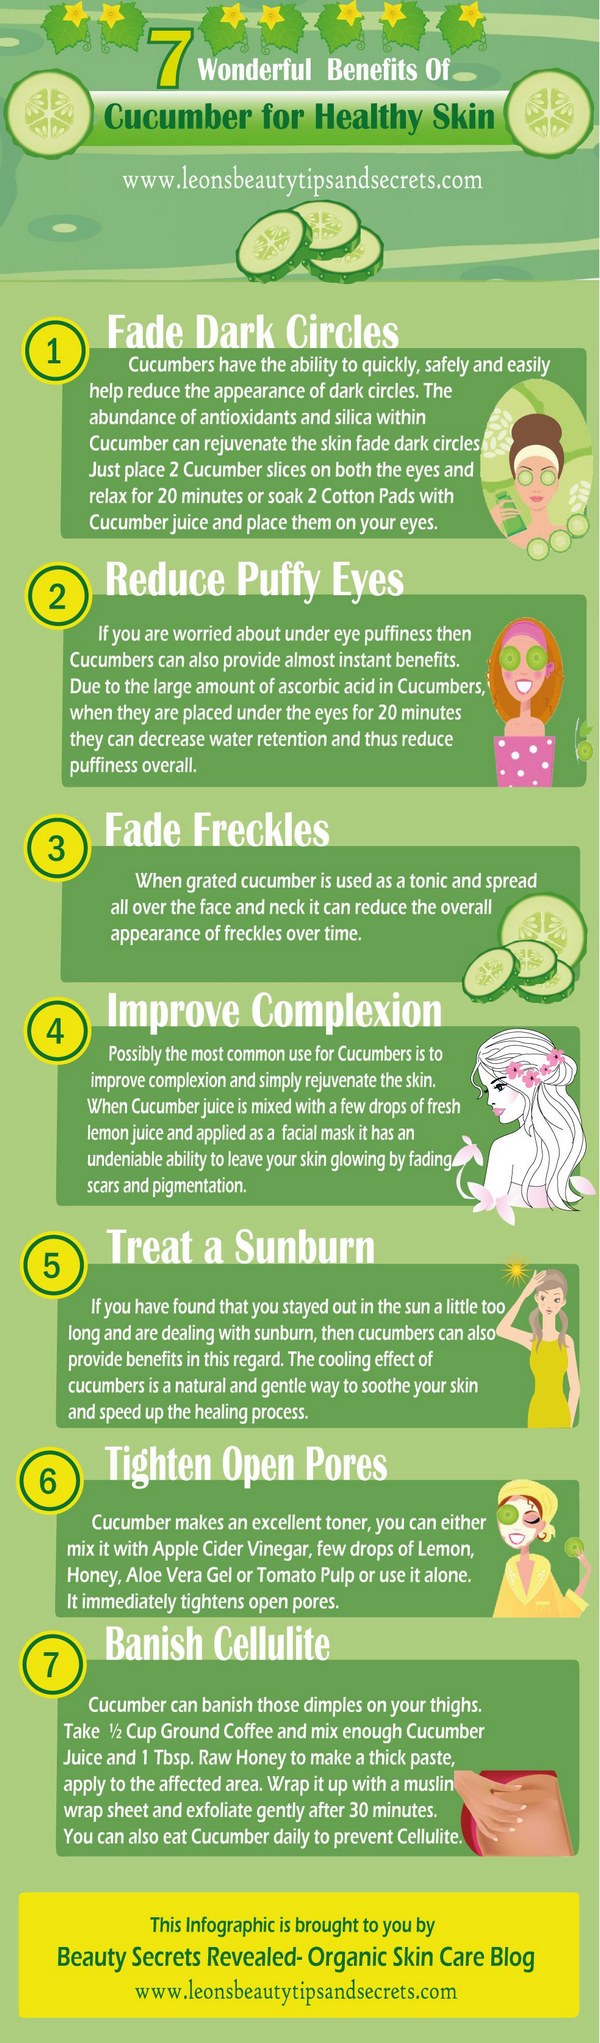 7 Wonderful Benefits of Cucumber For Healthy Skin